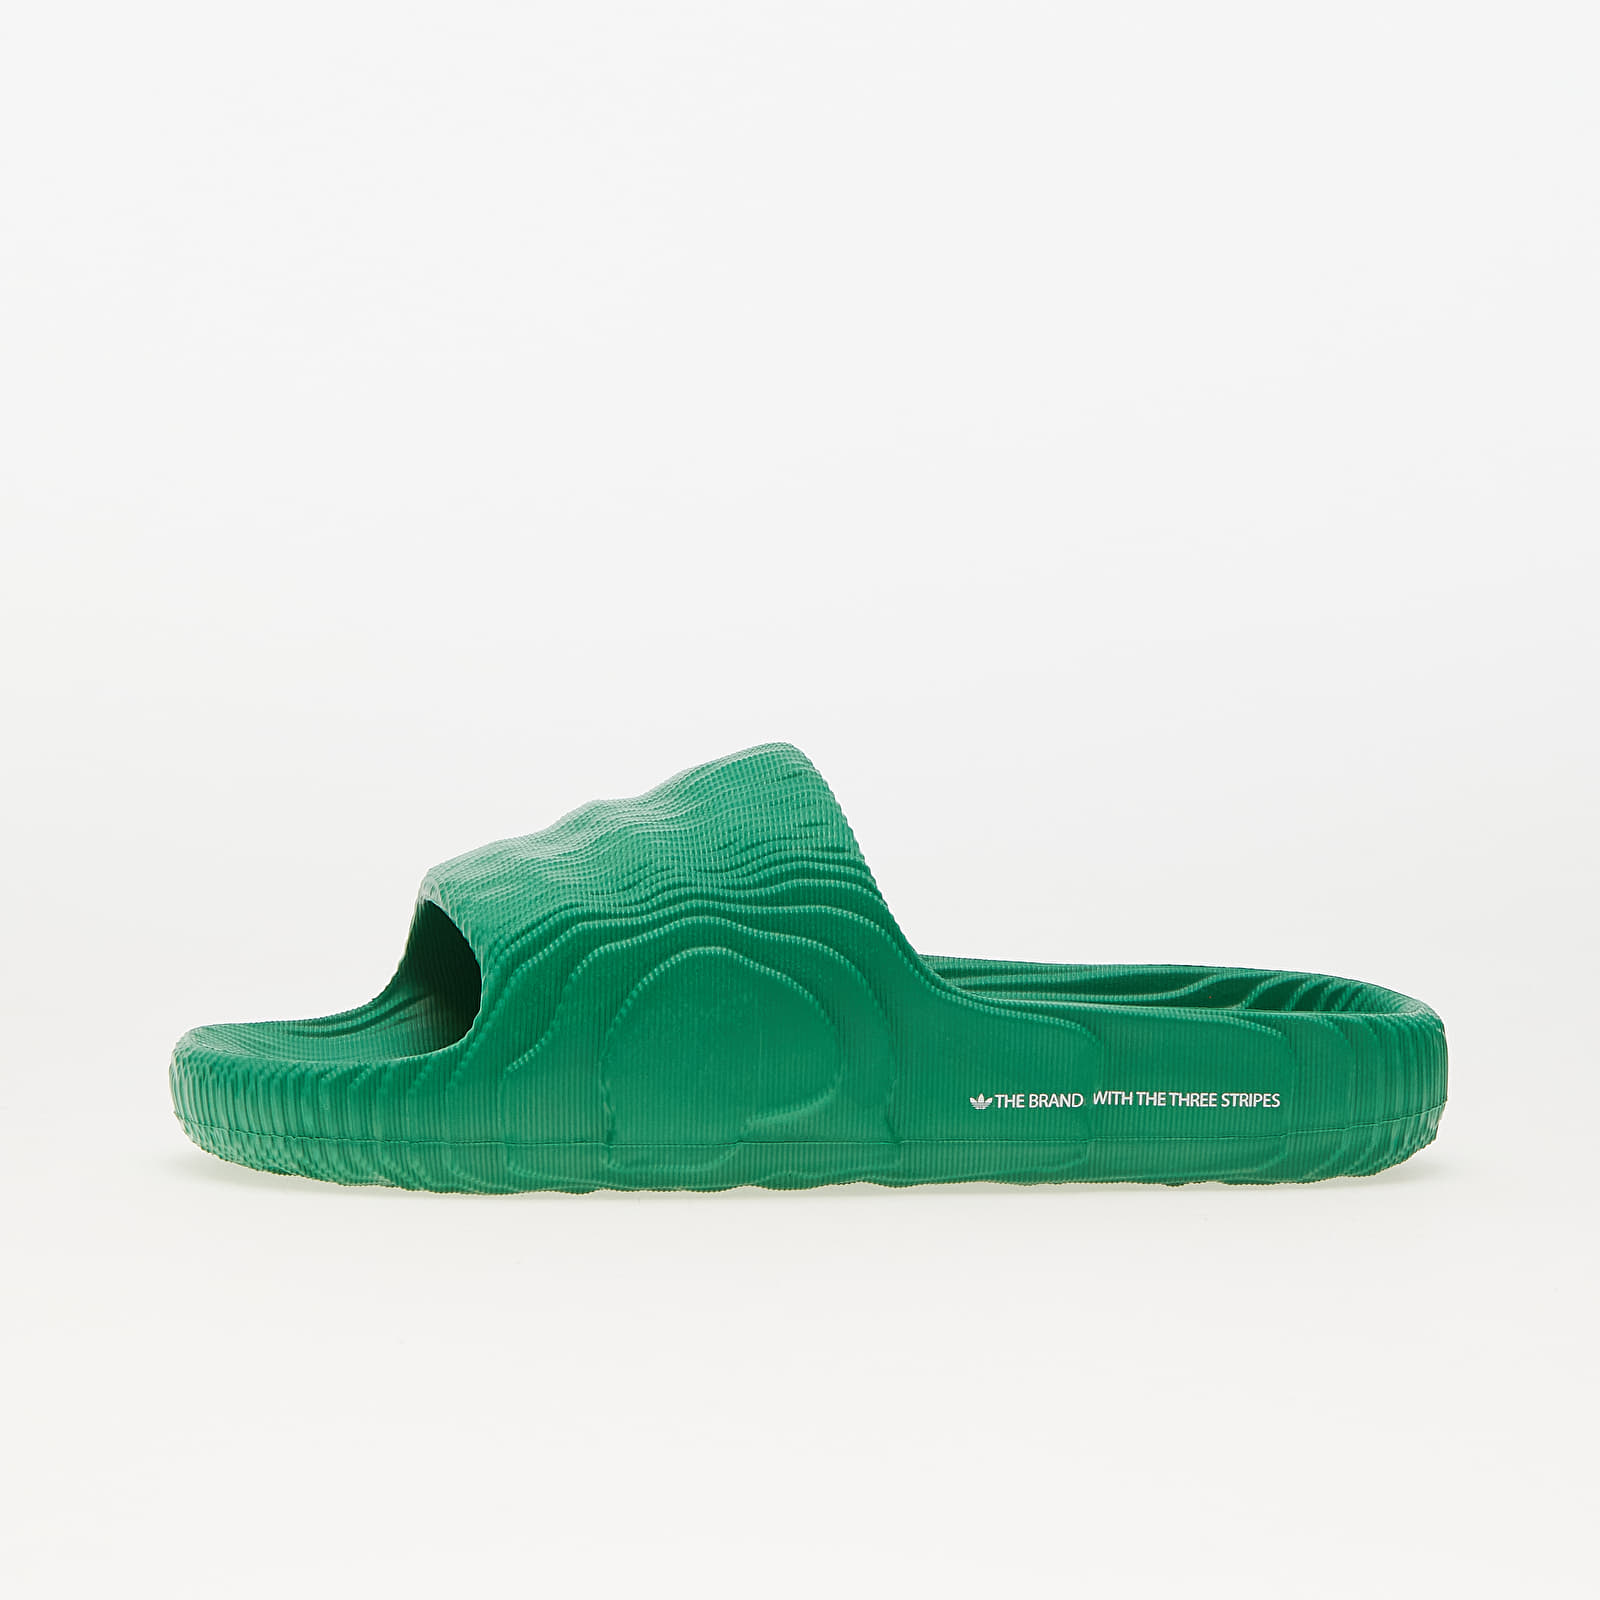 Men's sneakers and shoes adidas Originals Adilette 22 Green